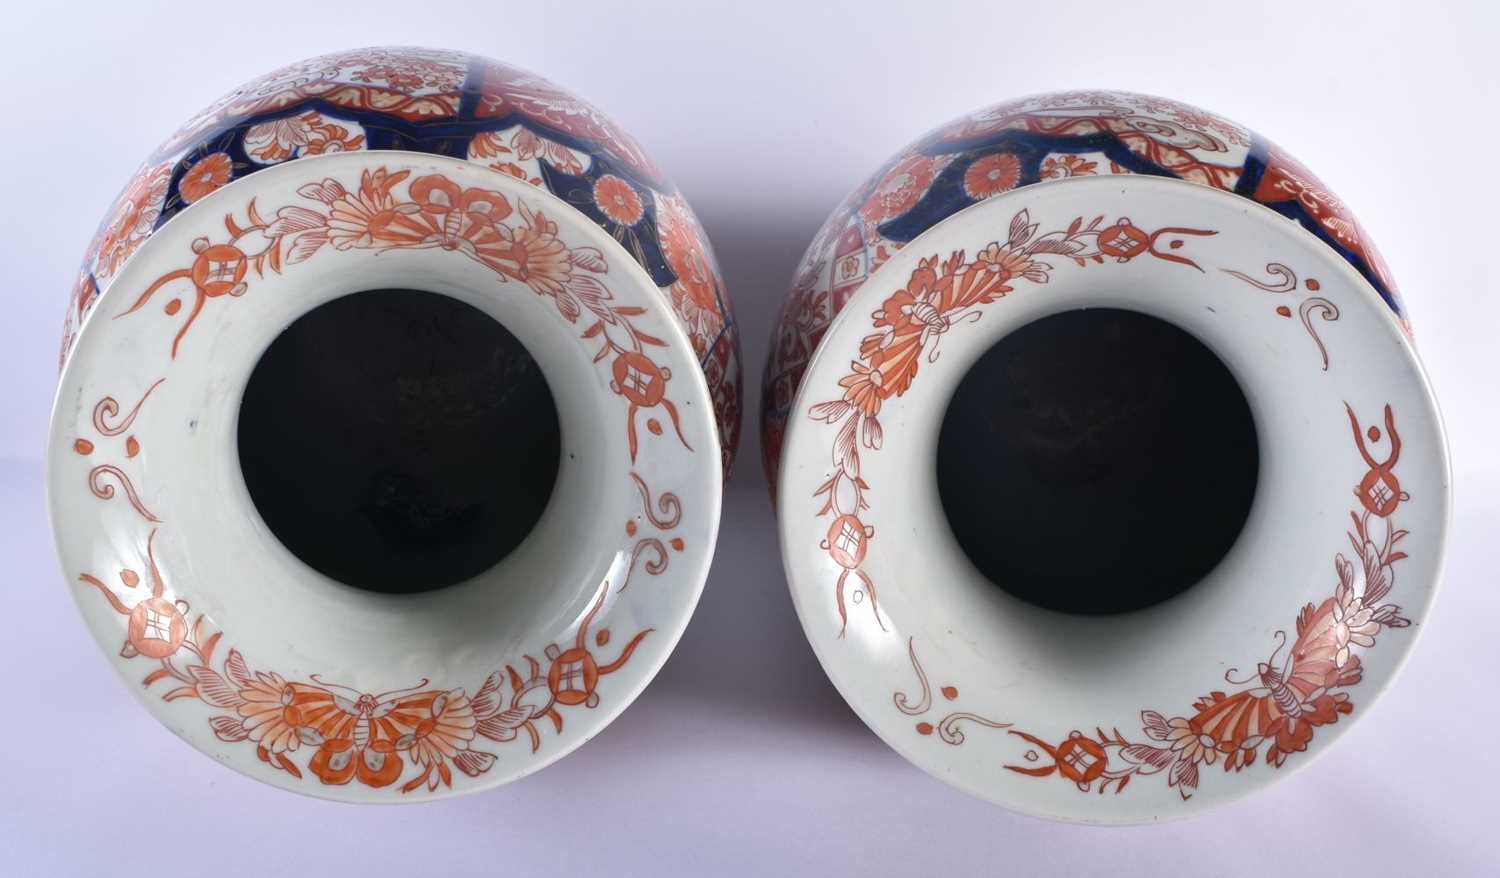 A LARGE PAIR OF 19TH CENTURY JAPANESE MEIJI PERIOD COUNTRY HOUSE IMARI VASES painted with foliage - Image 5 of 6